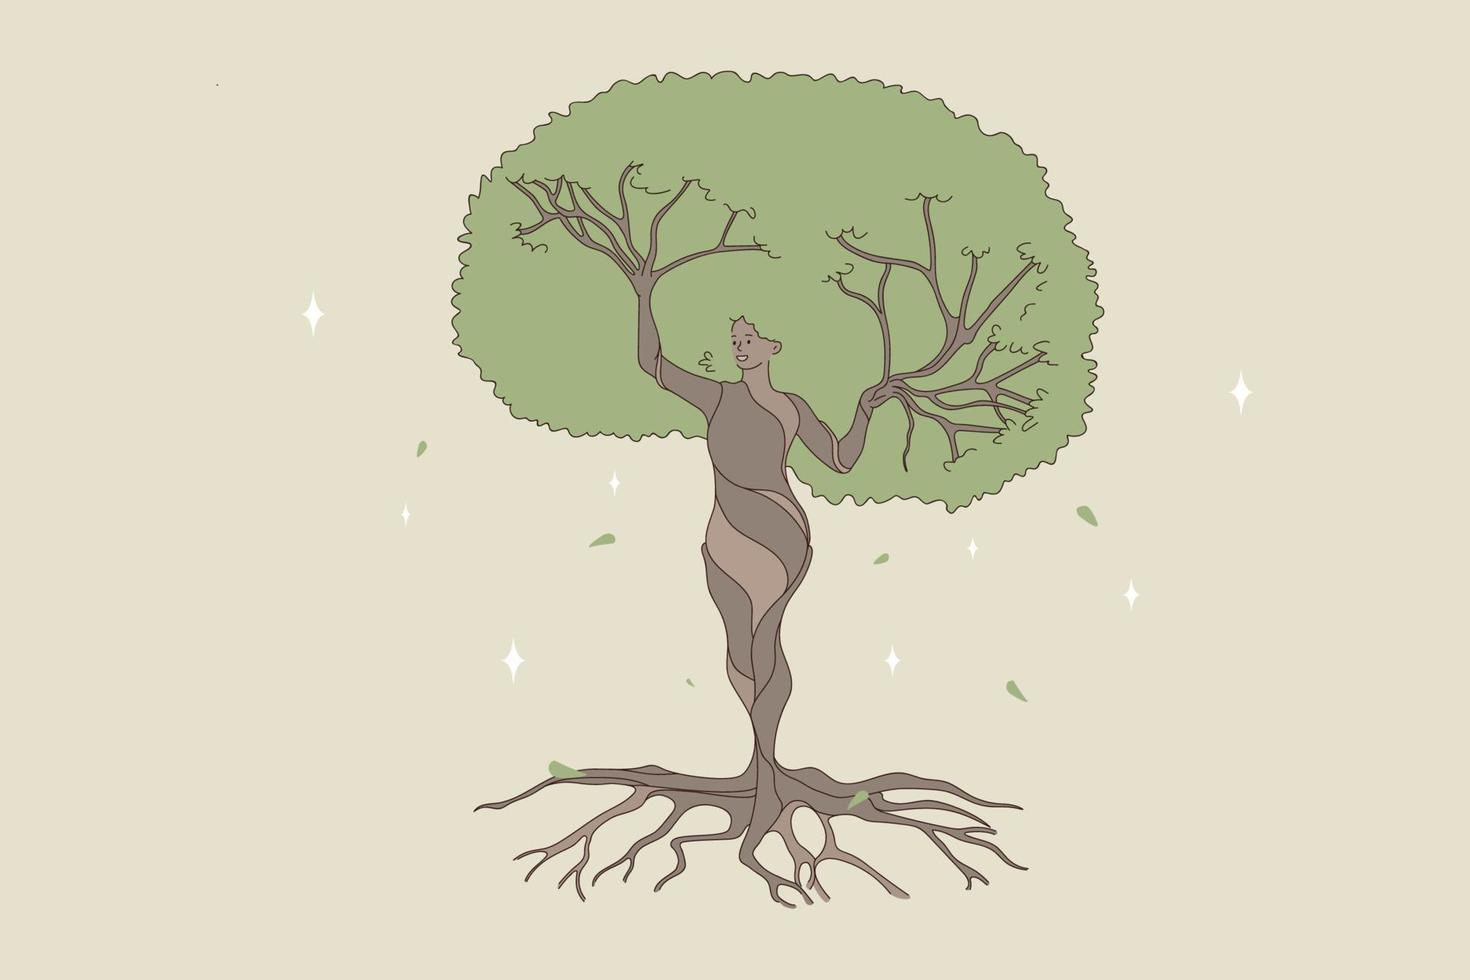 Woman shape being a natural forest tree. Vector concept illustration of nature and human balance by saving and protect nature.